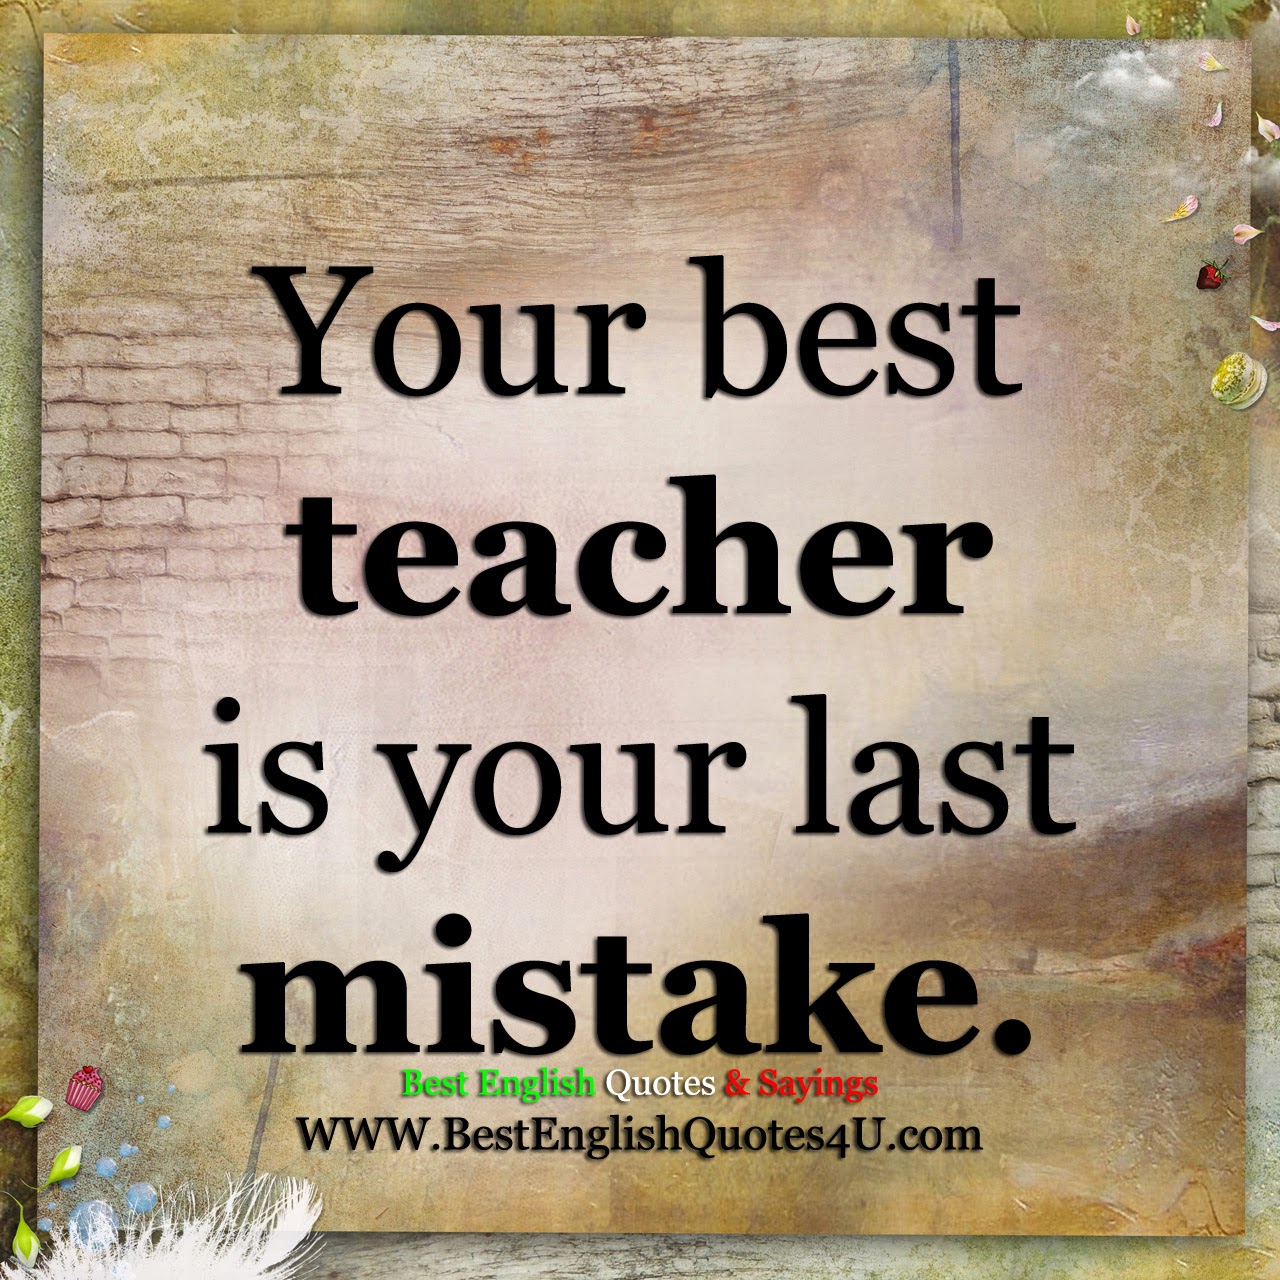 Your best teacher... Best English Quotes And Sayings